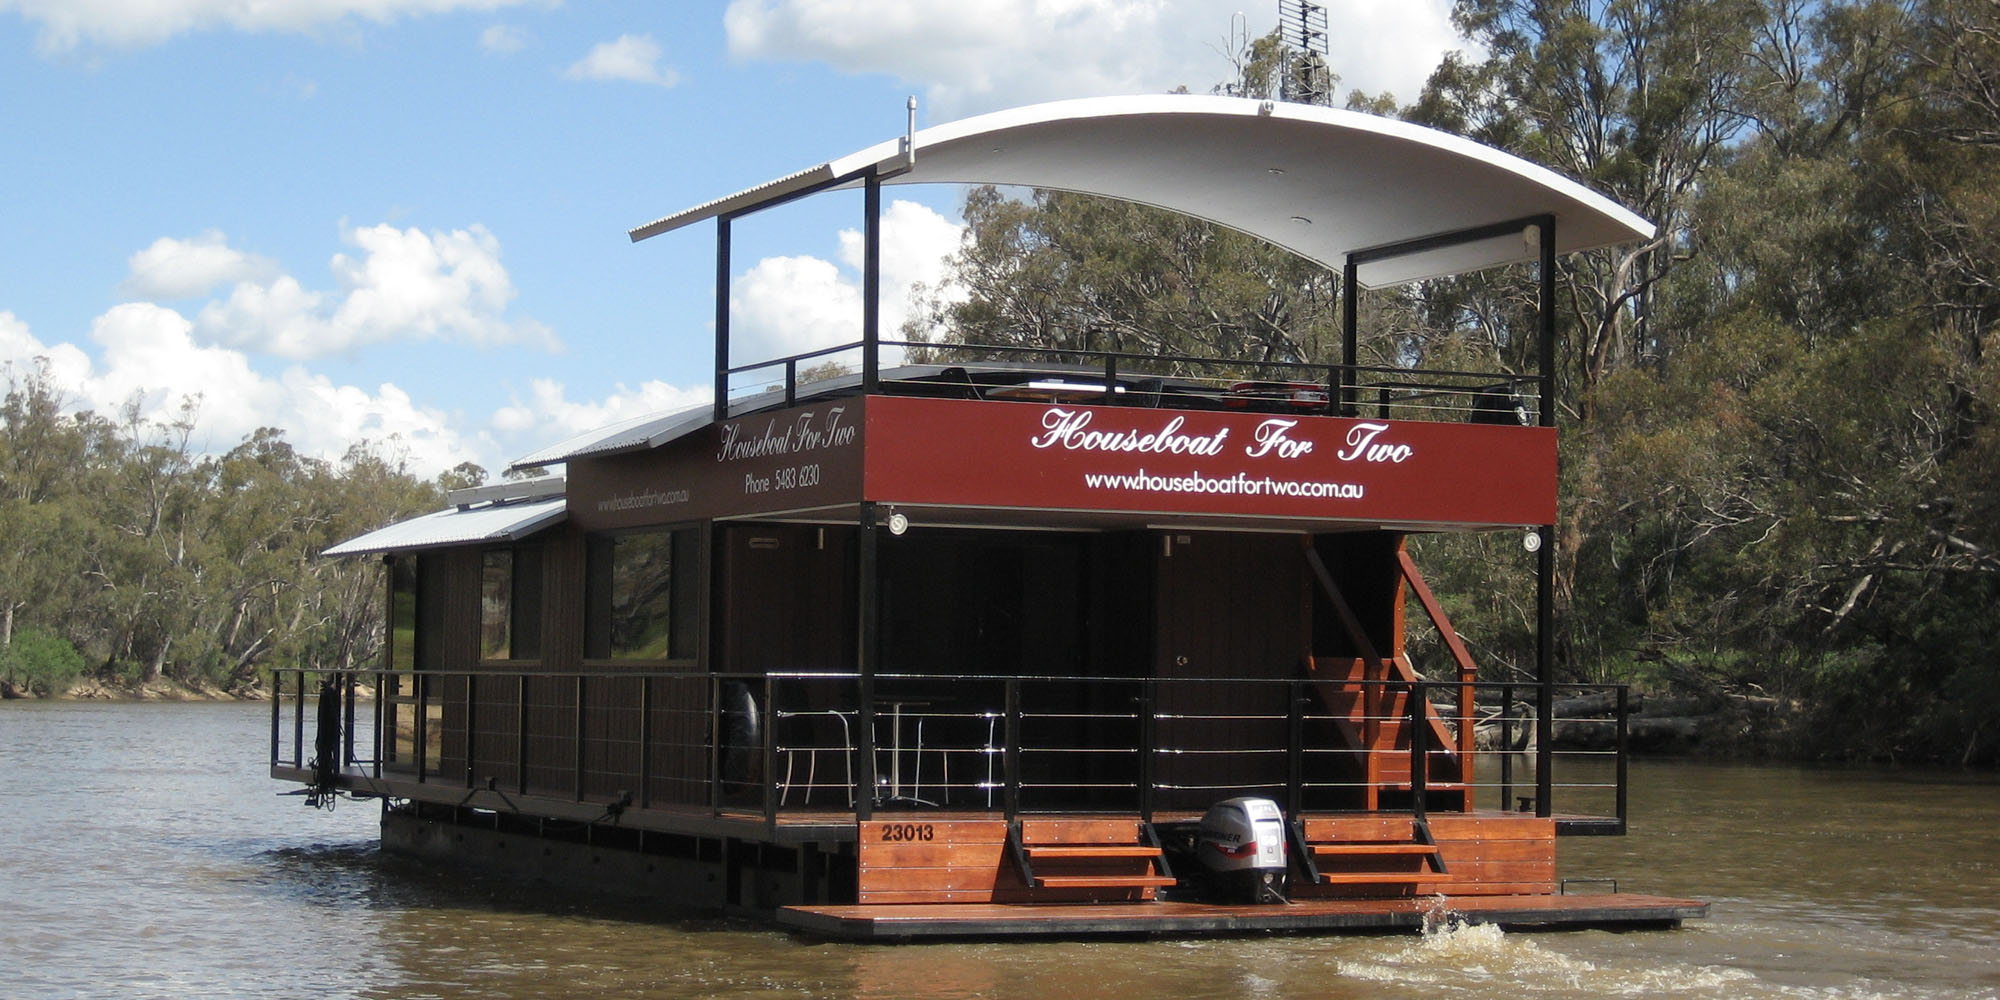 Houseboat for Two